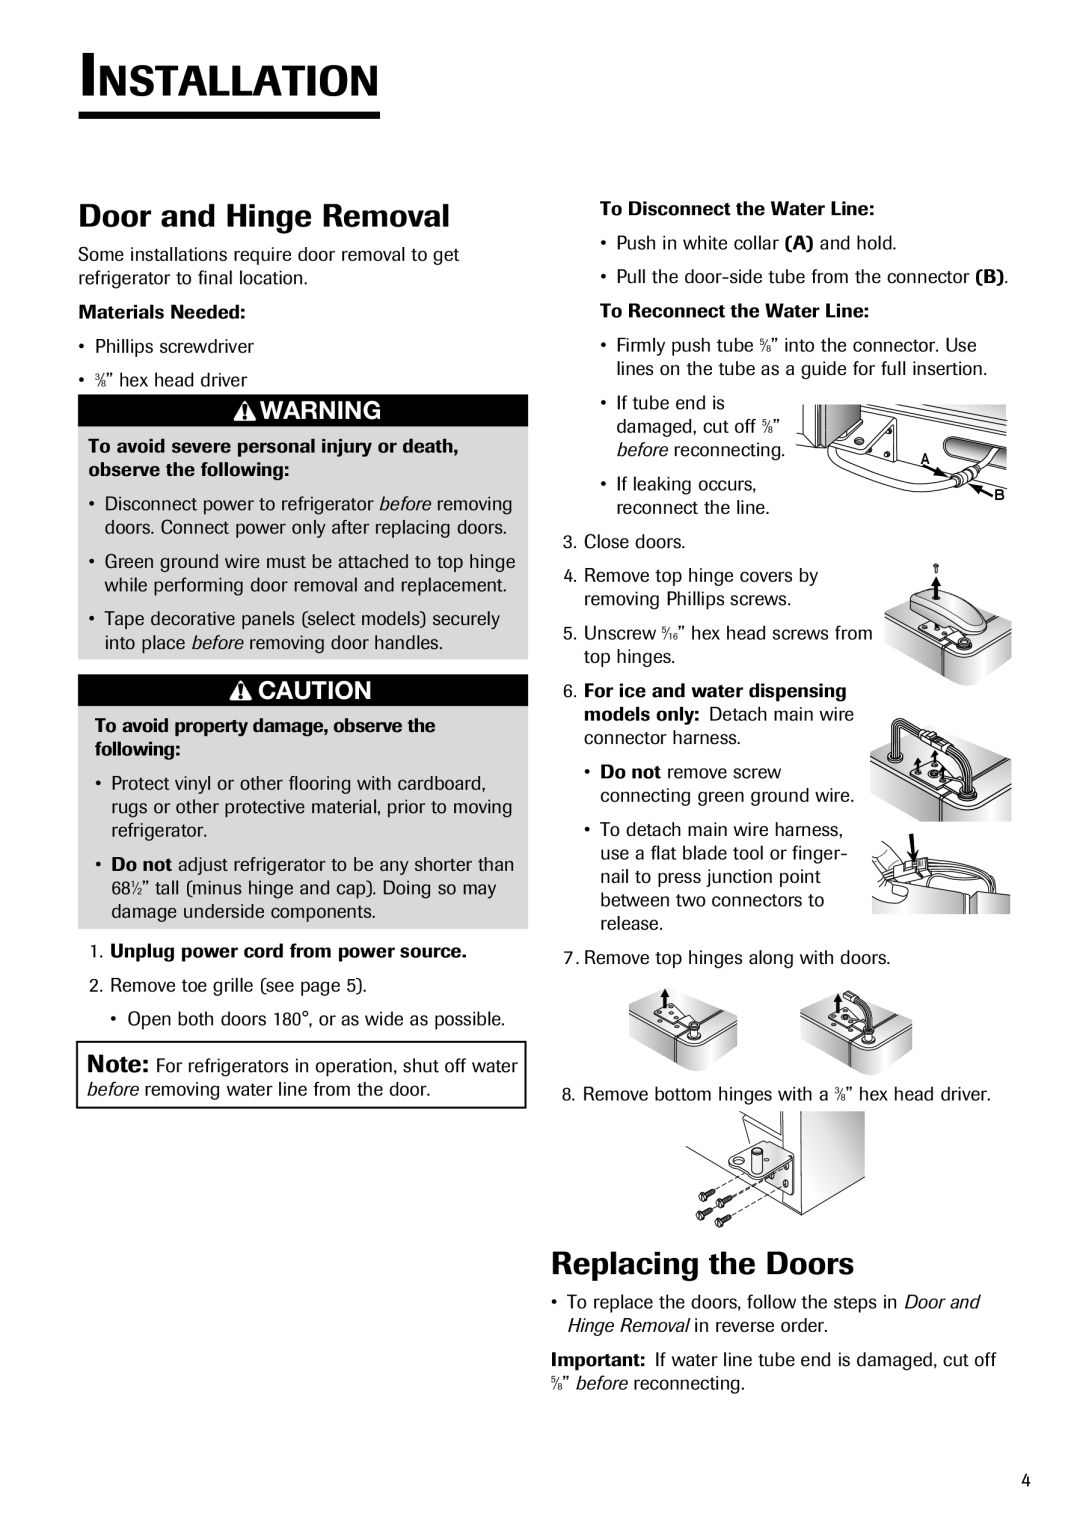 Fisher & Paykel RX256DT7X1 installation instructions Door and Hinge Removal, Replacing the Doors, Installation 